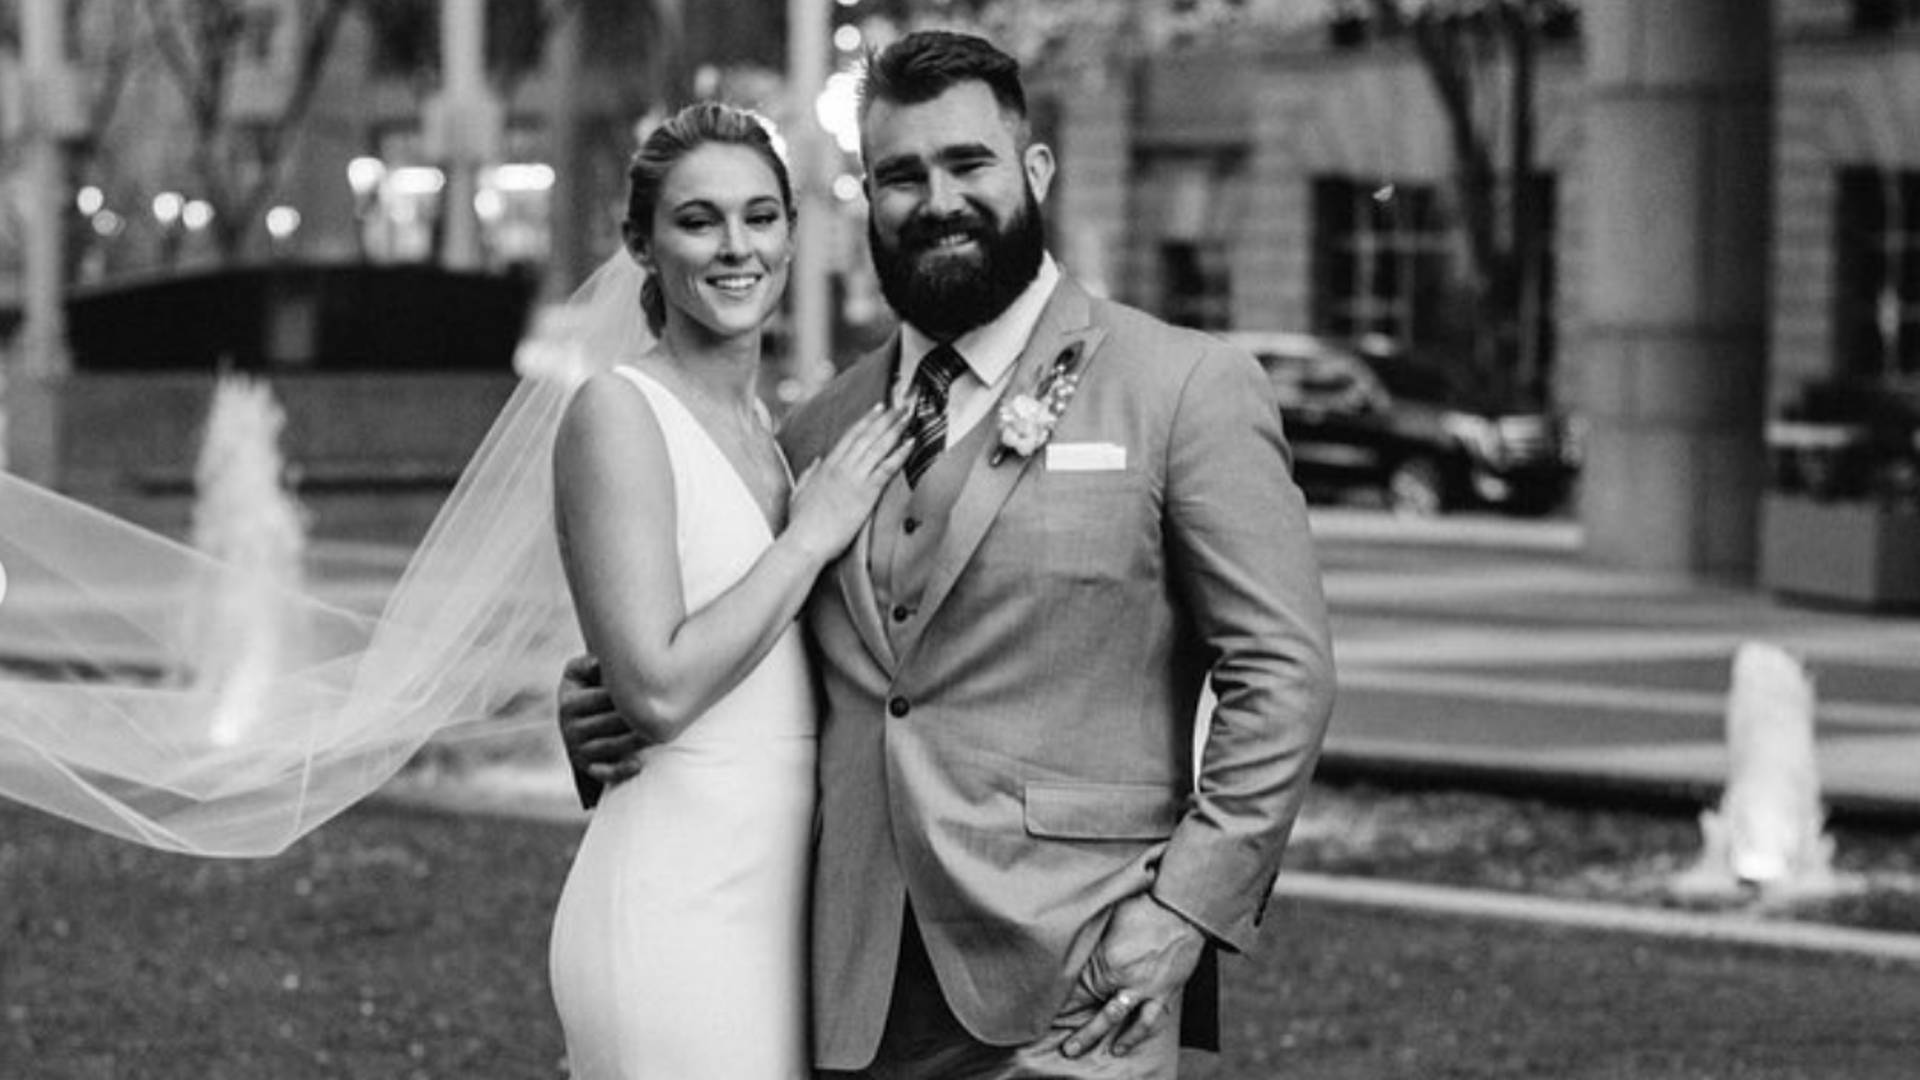 Who is Jason Kelce's wife? When Did Jason Kelce and Kylie McDevitt's Marriage Happen?